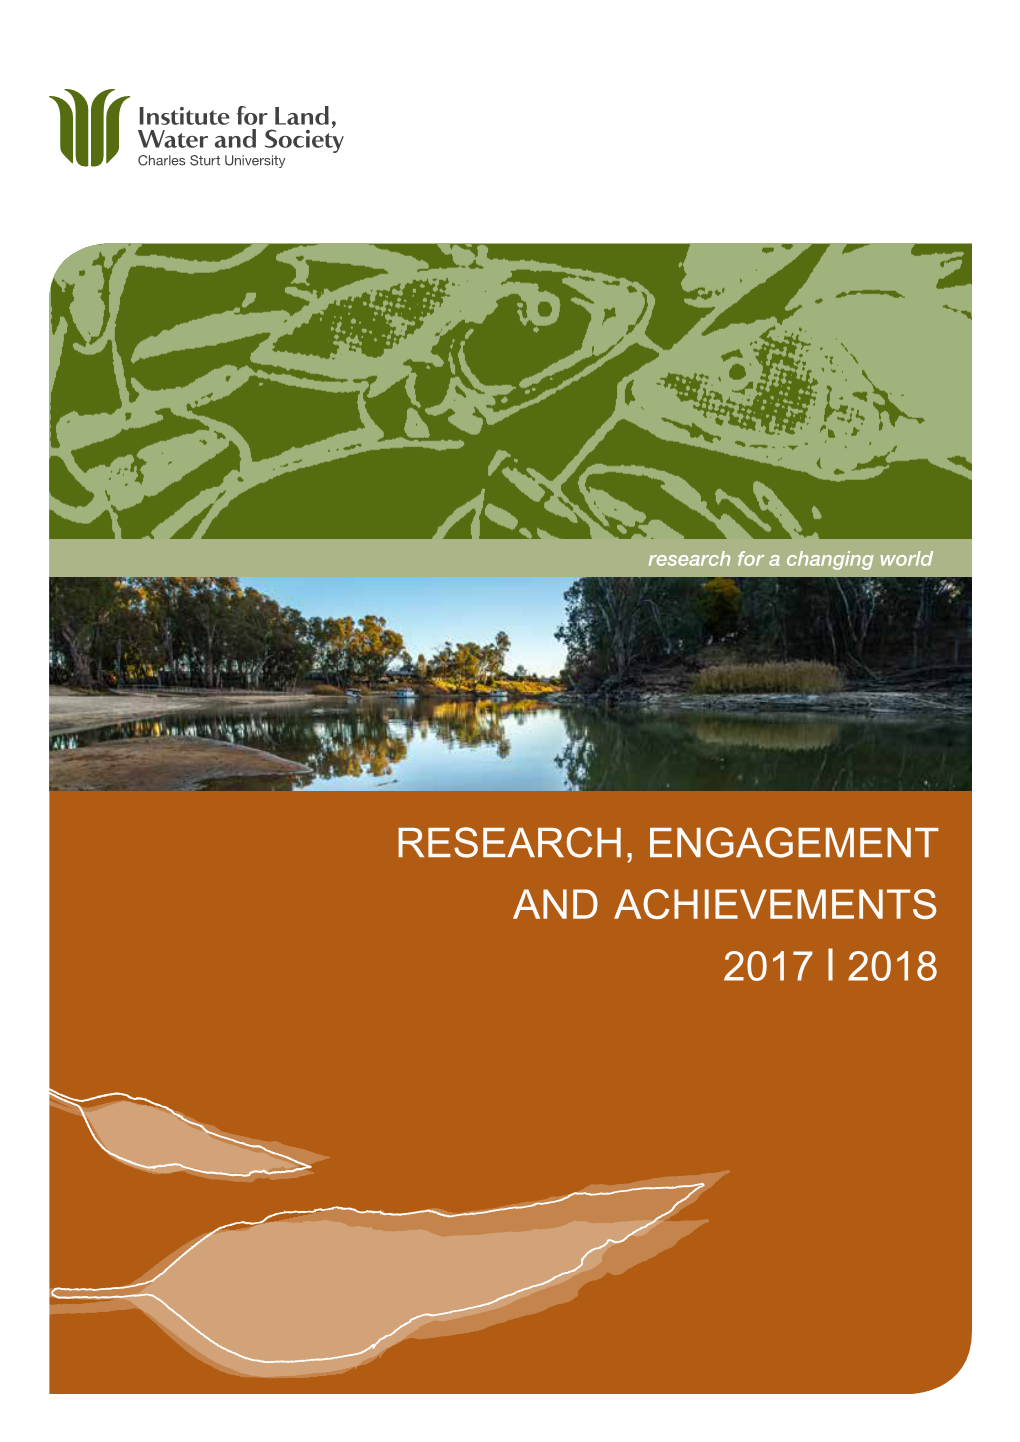 RESEARCH, ENGAGEMENT and ACHIEVEMENTS 2017 L 2018 2 Research, Engagement and Achievements 2017/2018